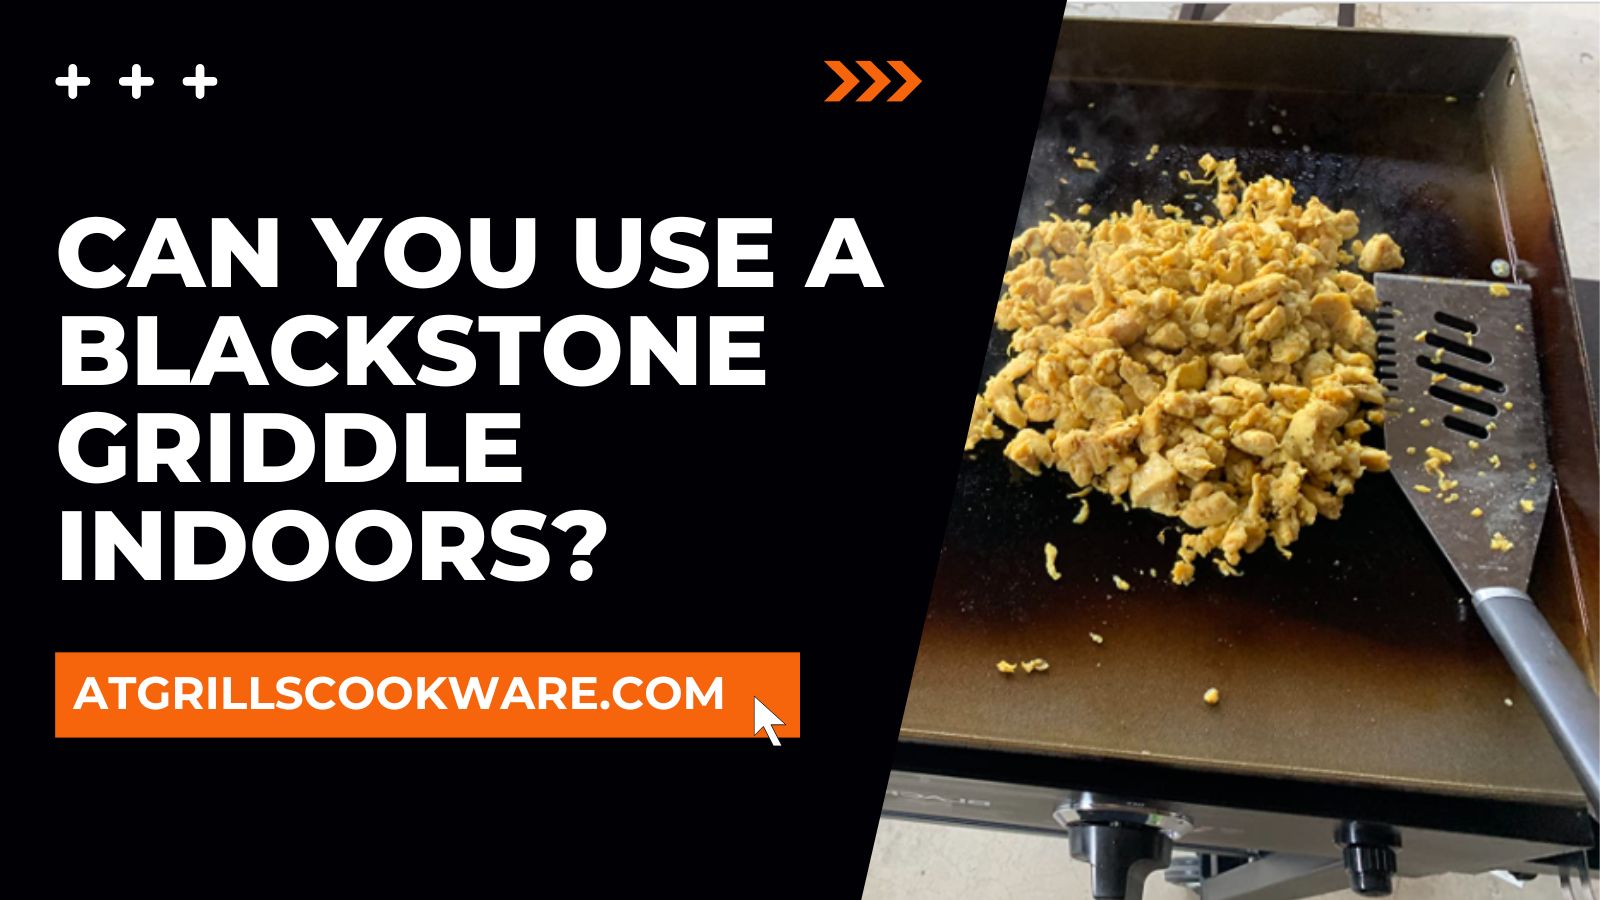 Can You Use A Blackstone Griddle Indoors